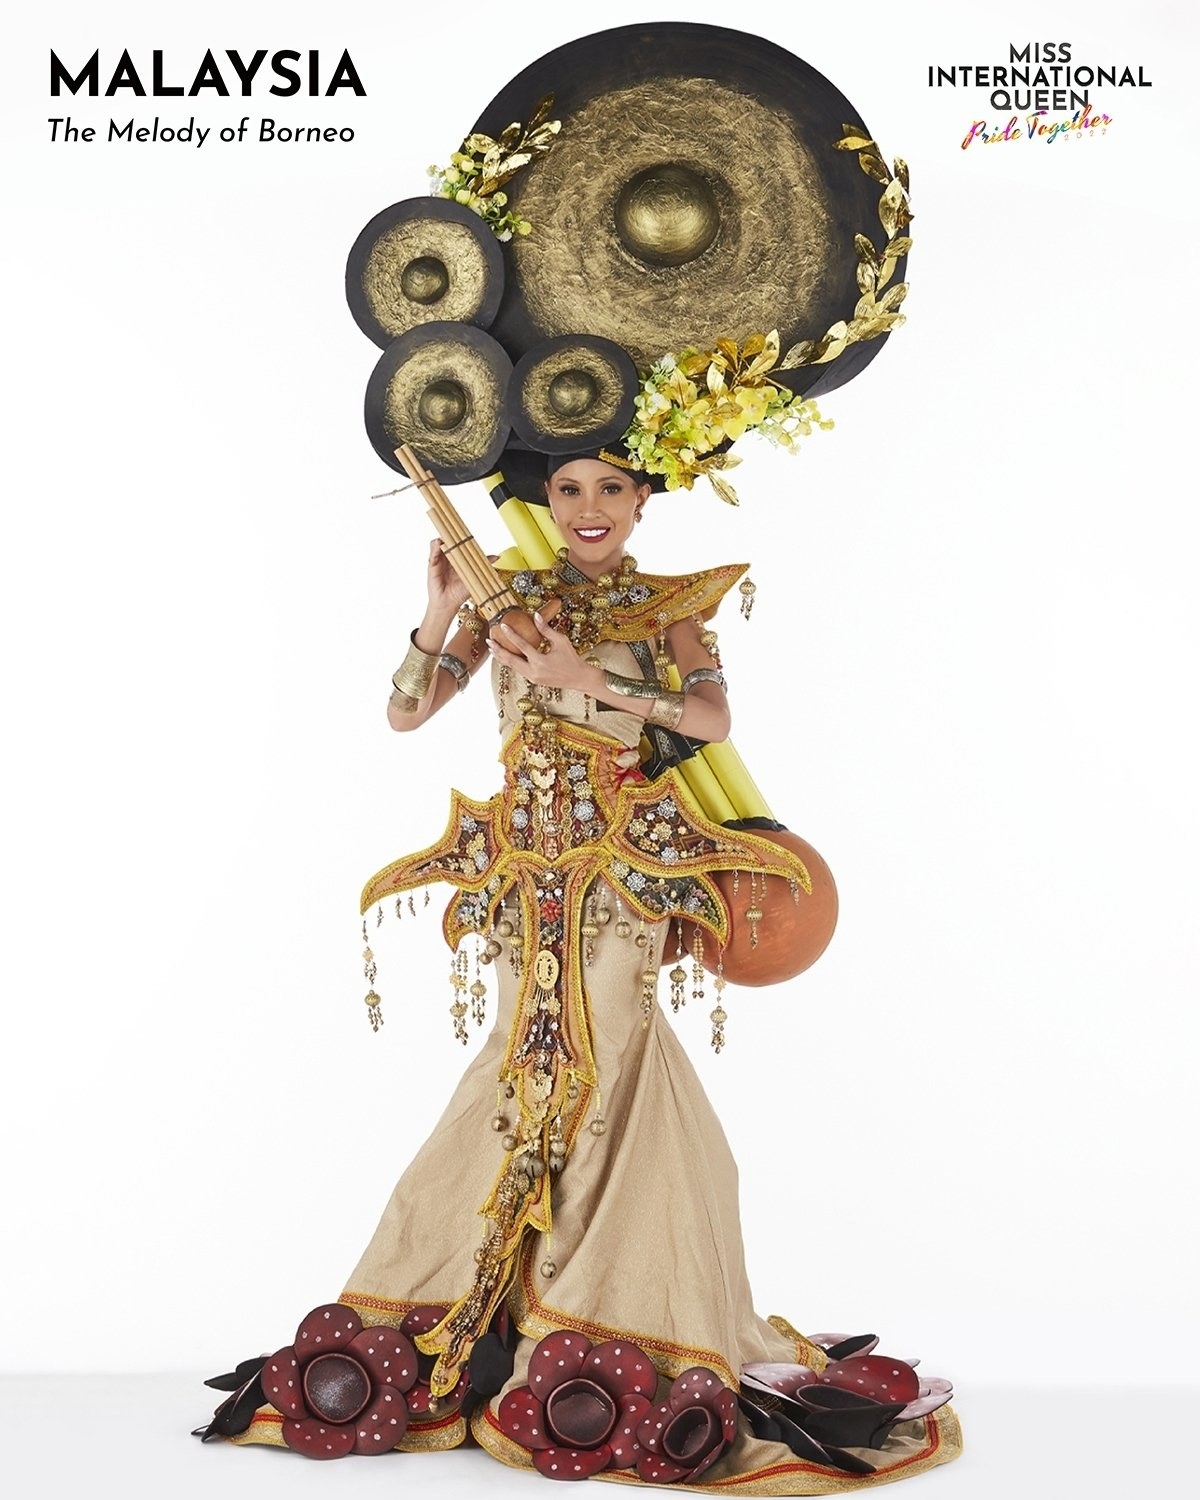 Miss Malaysia in a gold and beige dress with flowers and a really big gong headpiece